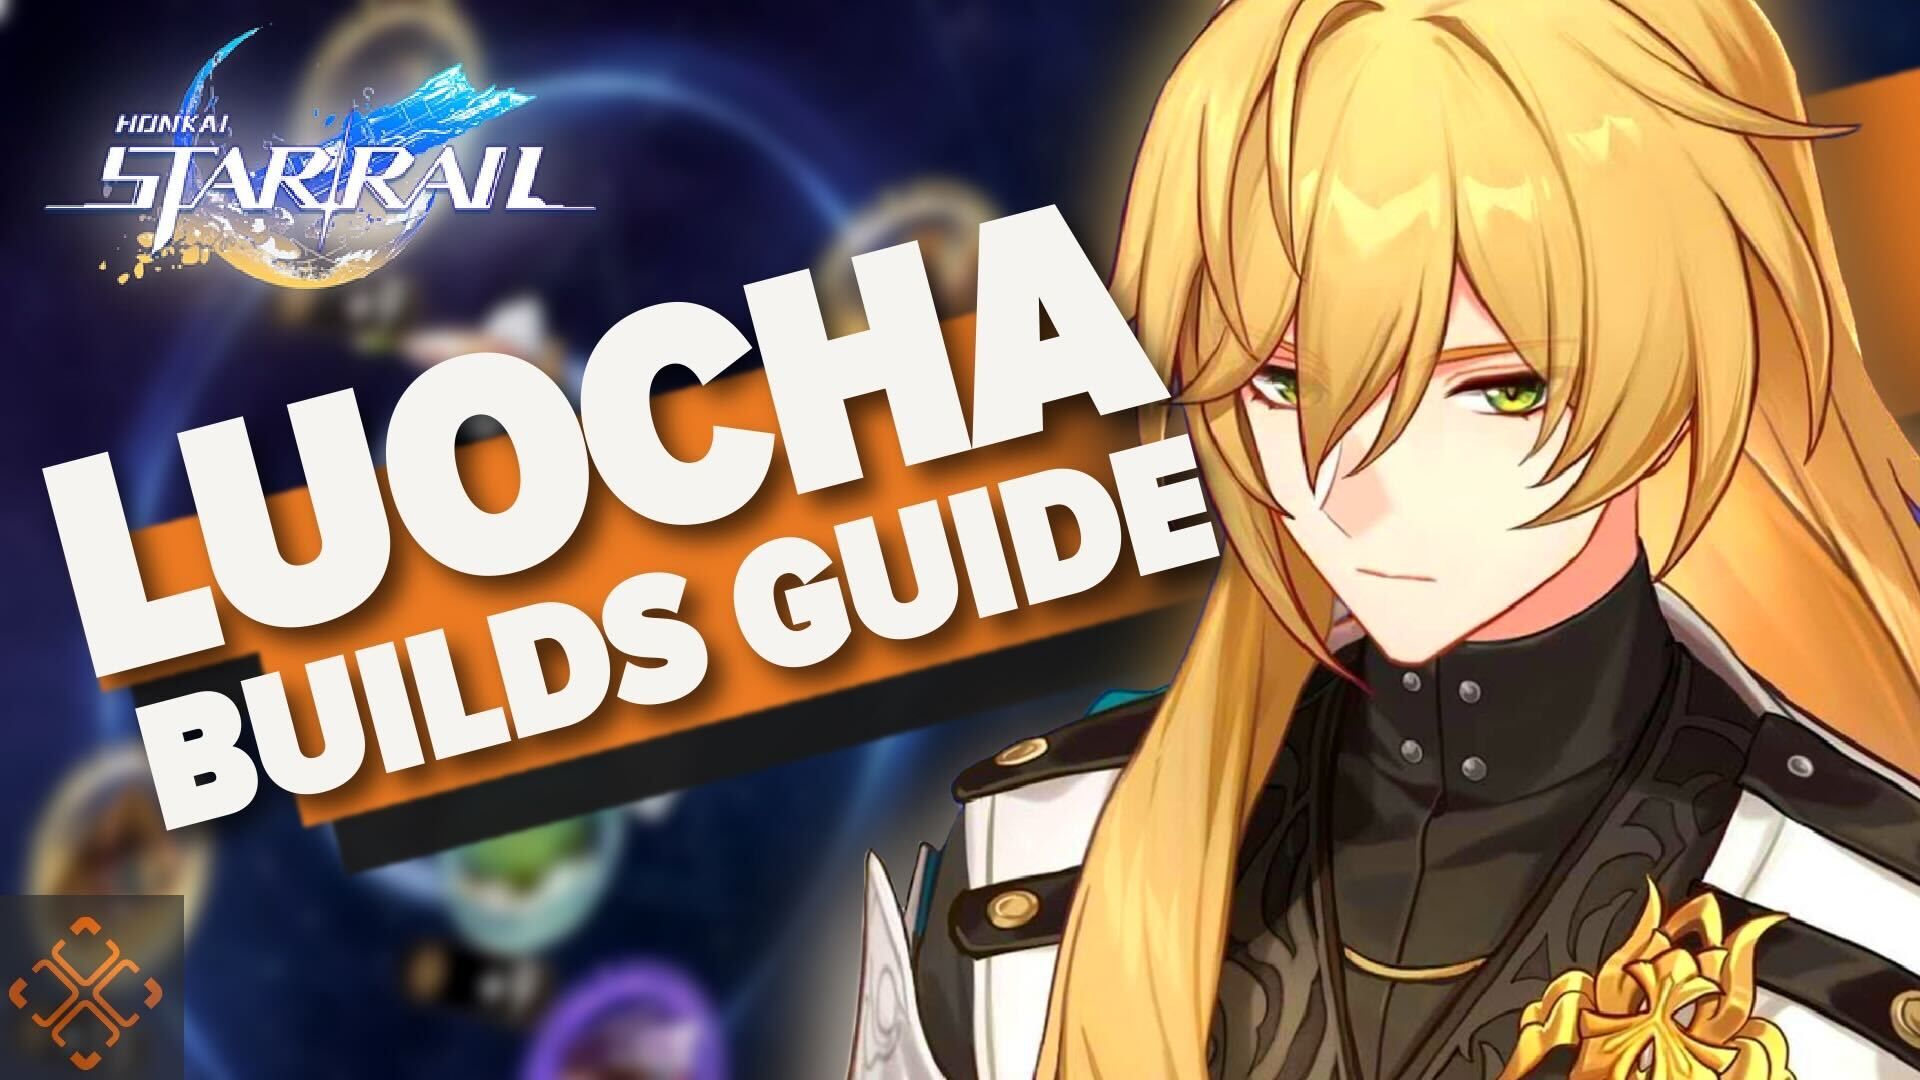 Luocha Banner Schedule and Rates